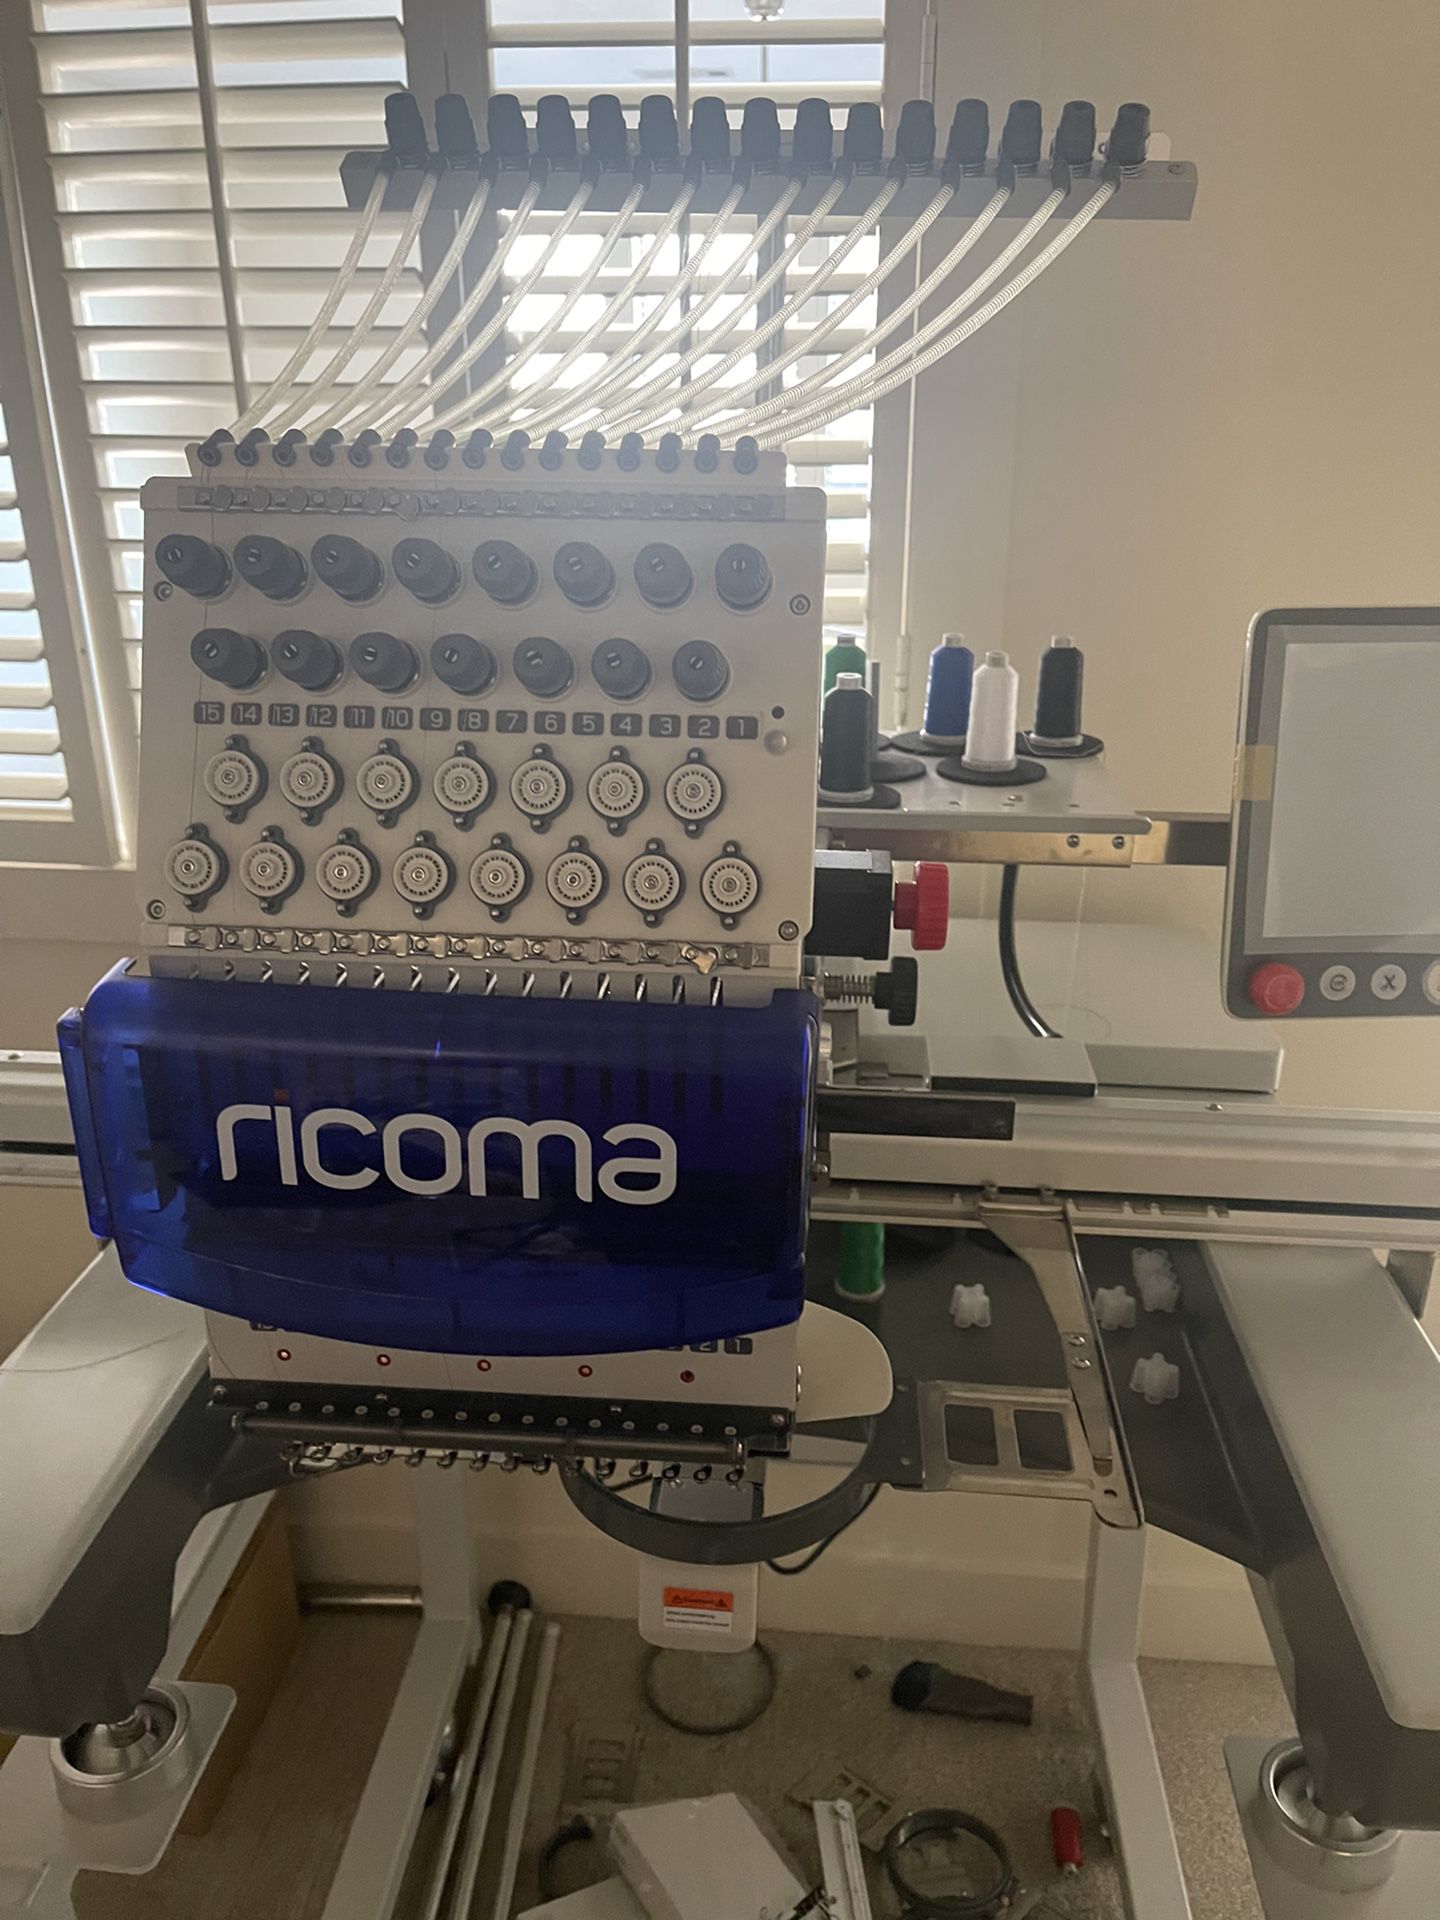 Ricoma 15 Needle Large Space Embroidery Machine SWD 1501 Never Used Table  Inc